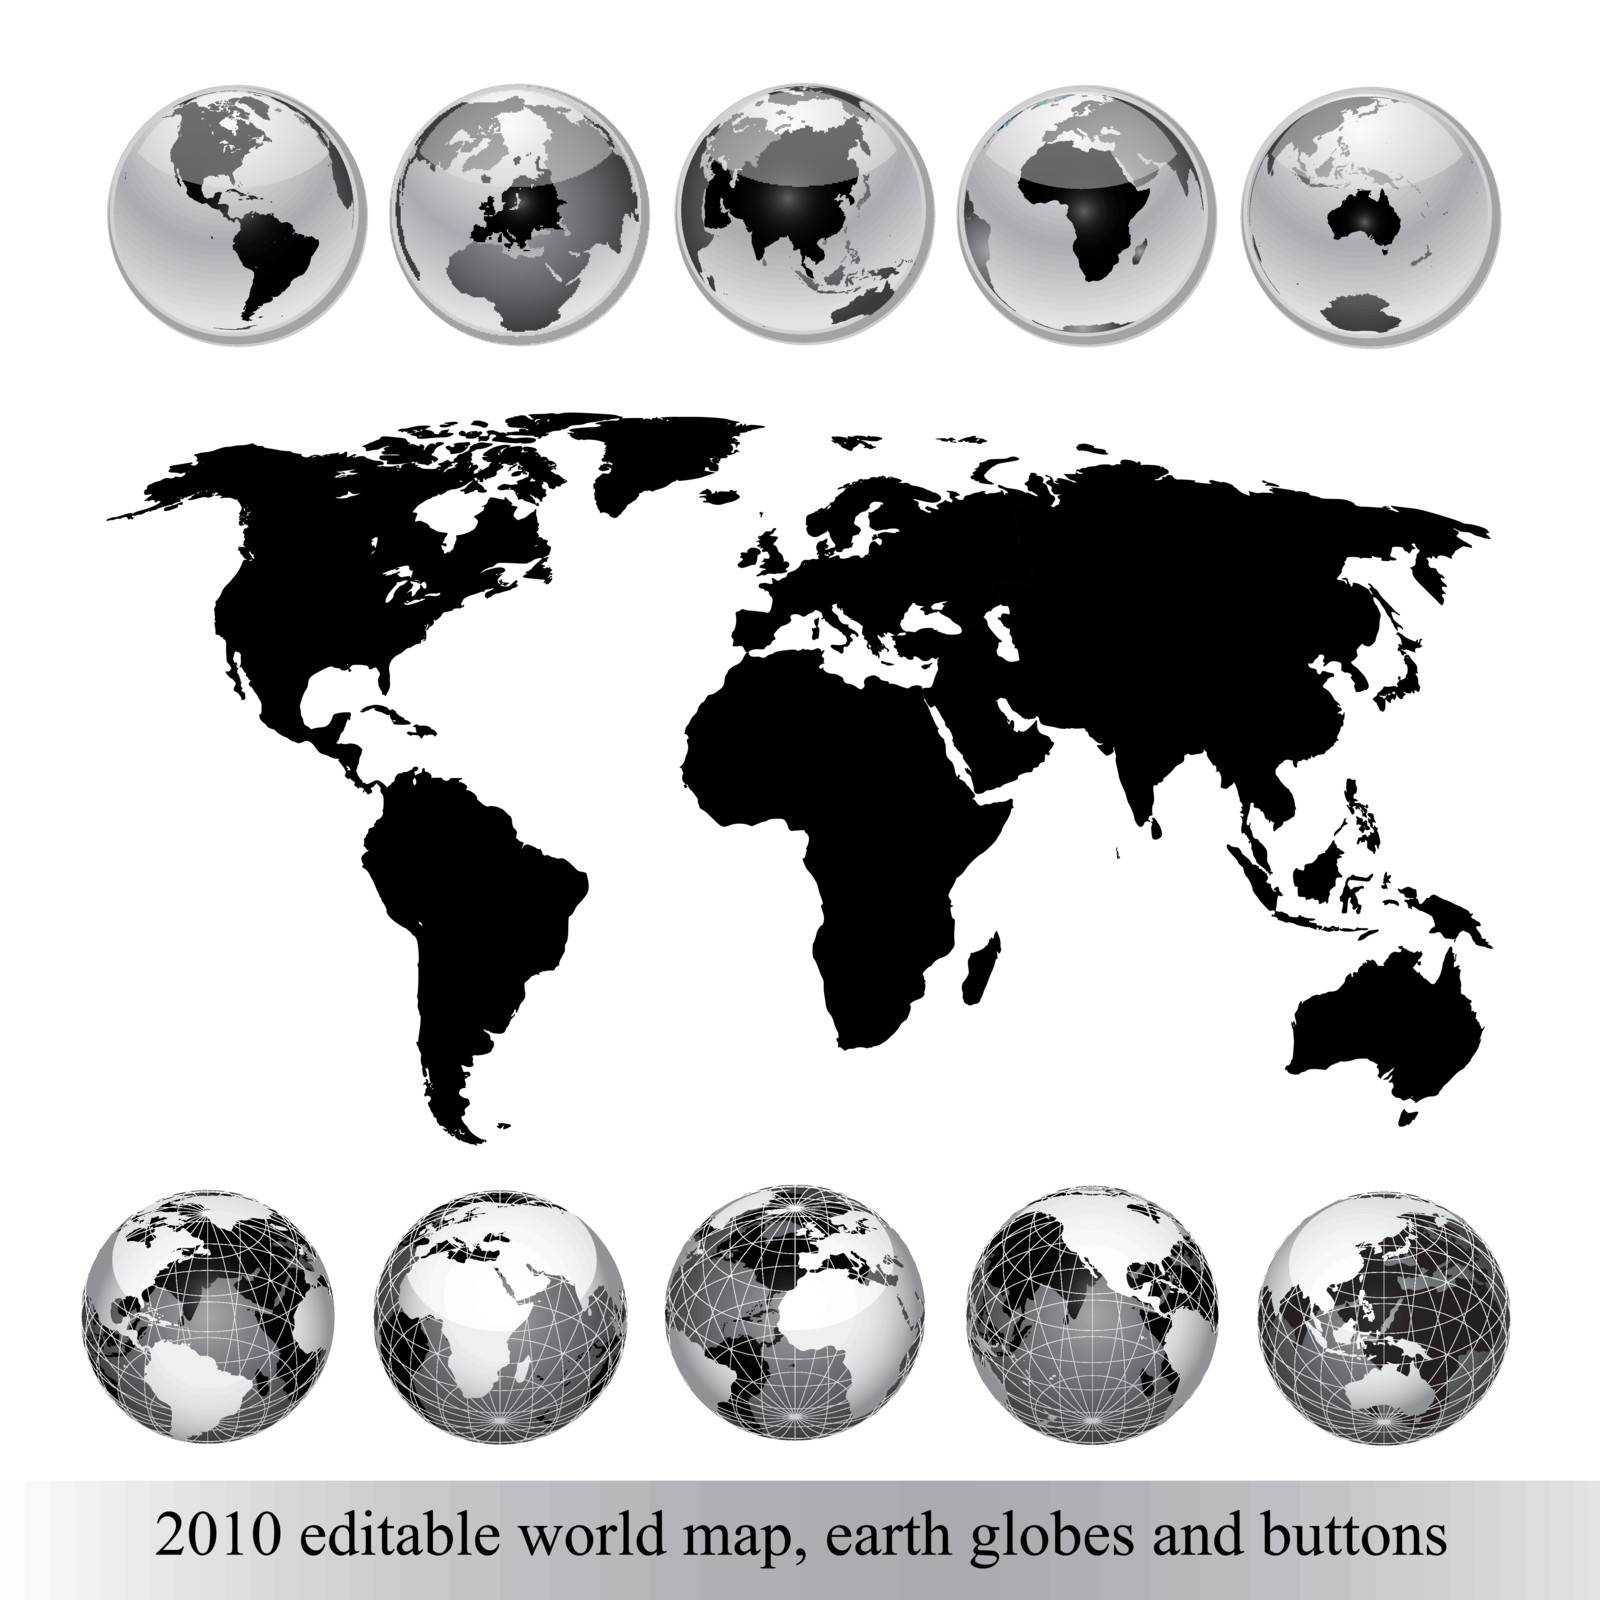 editable world map,earth globes and buttons